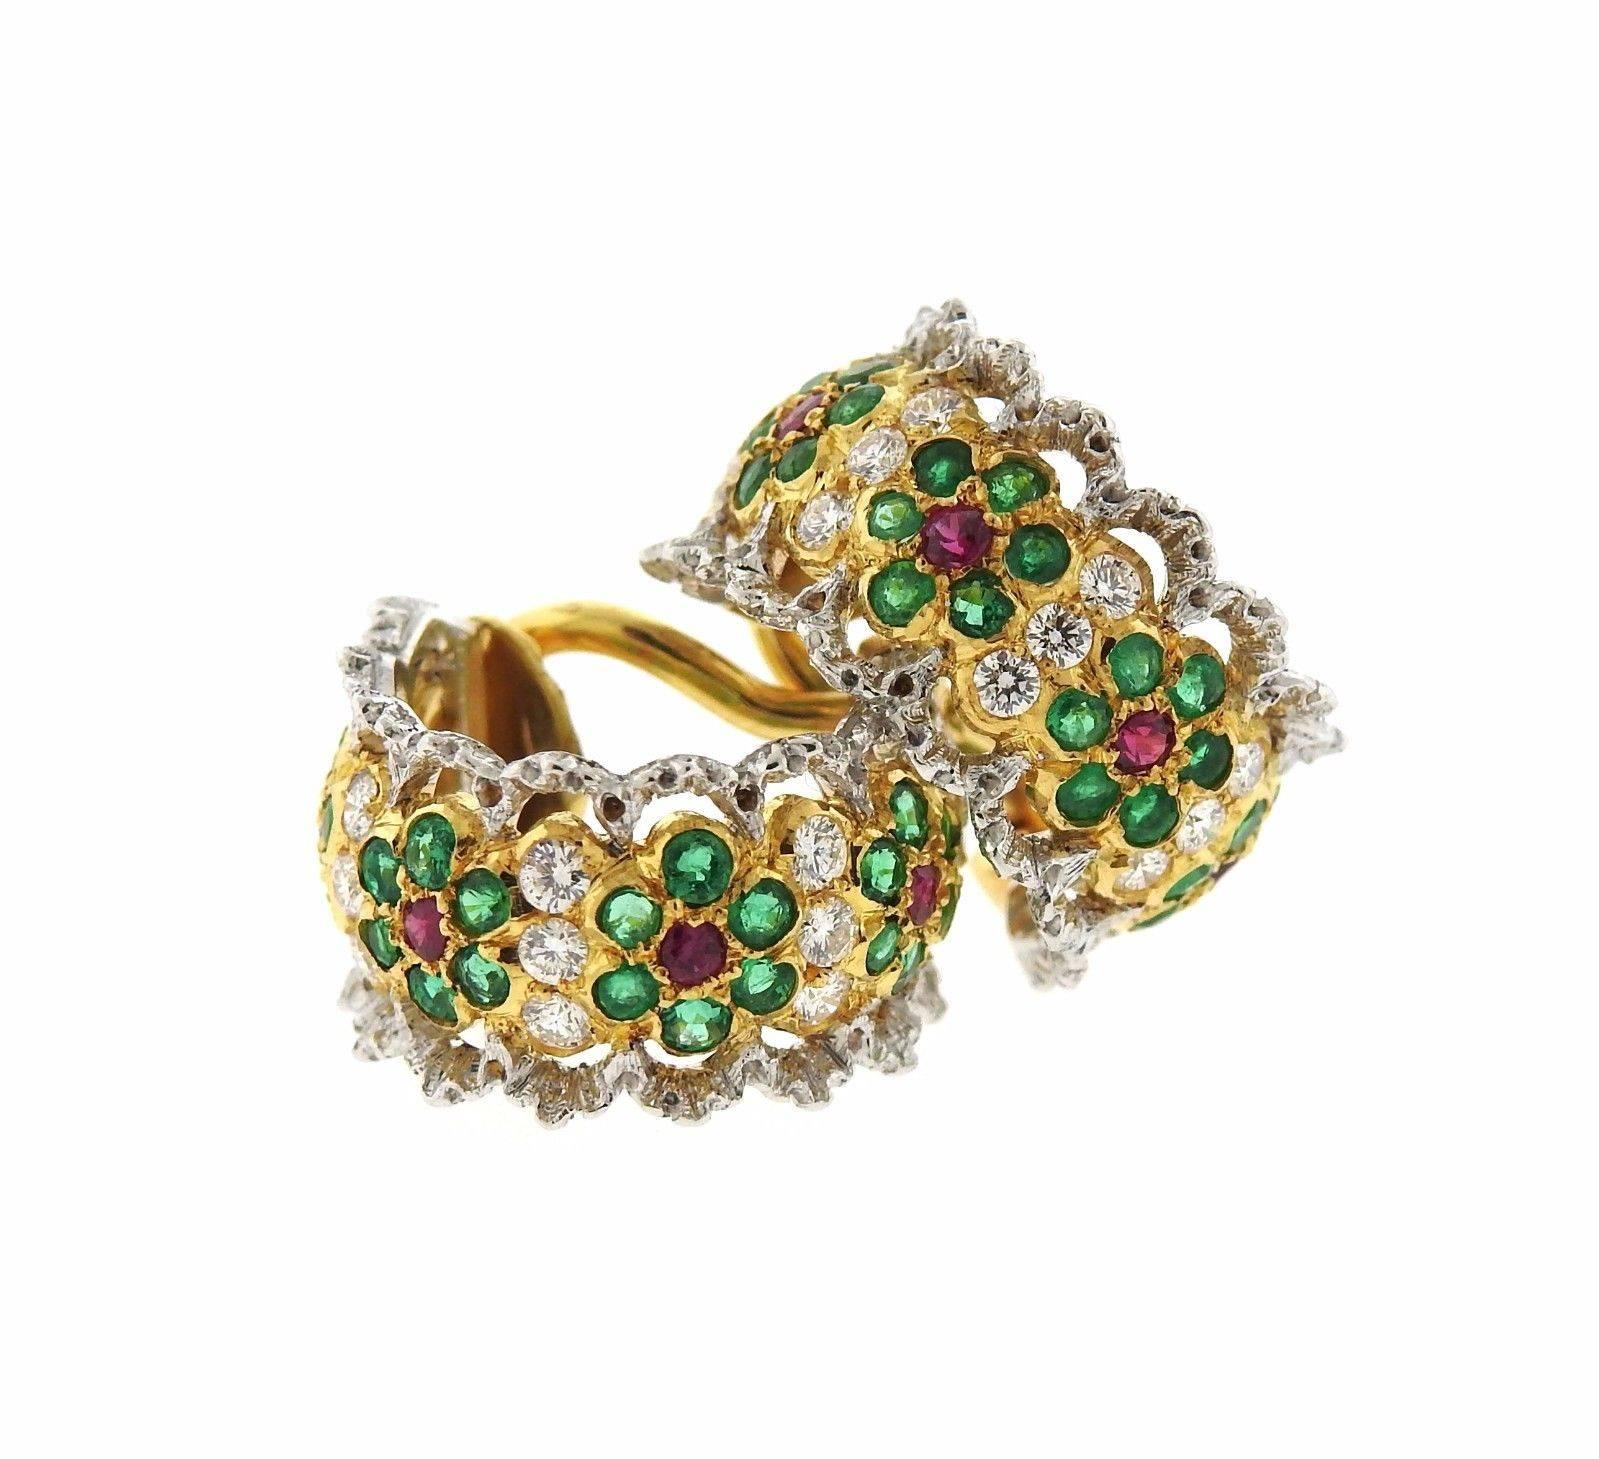 A pair of 18k yellow and white gold earrings set with emeralds, rubies, and approximately 0.25ctw of H/VS diamonds.  The earrings measure 15mm x 9mm wide and weigh 7.7 grams.  Marked: Buccellati Italy 18k.  Retail is $23,130. Come with Buccellati